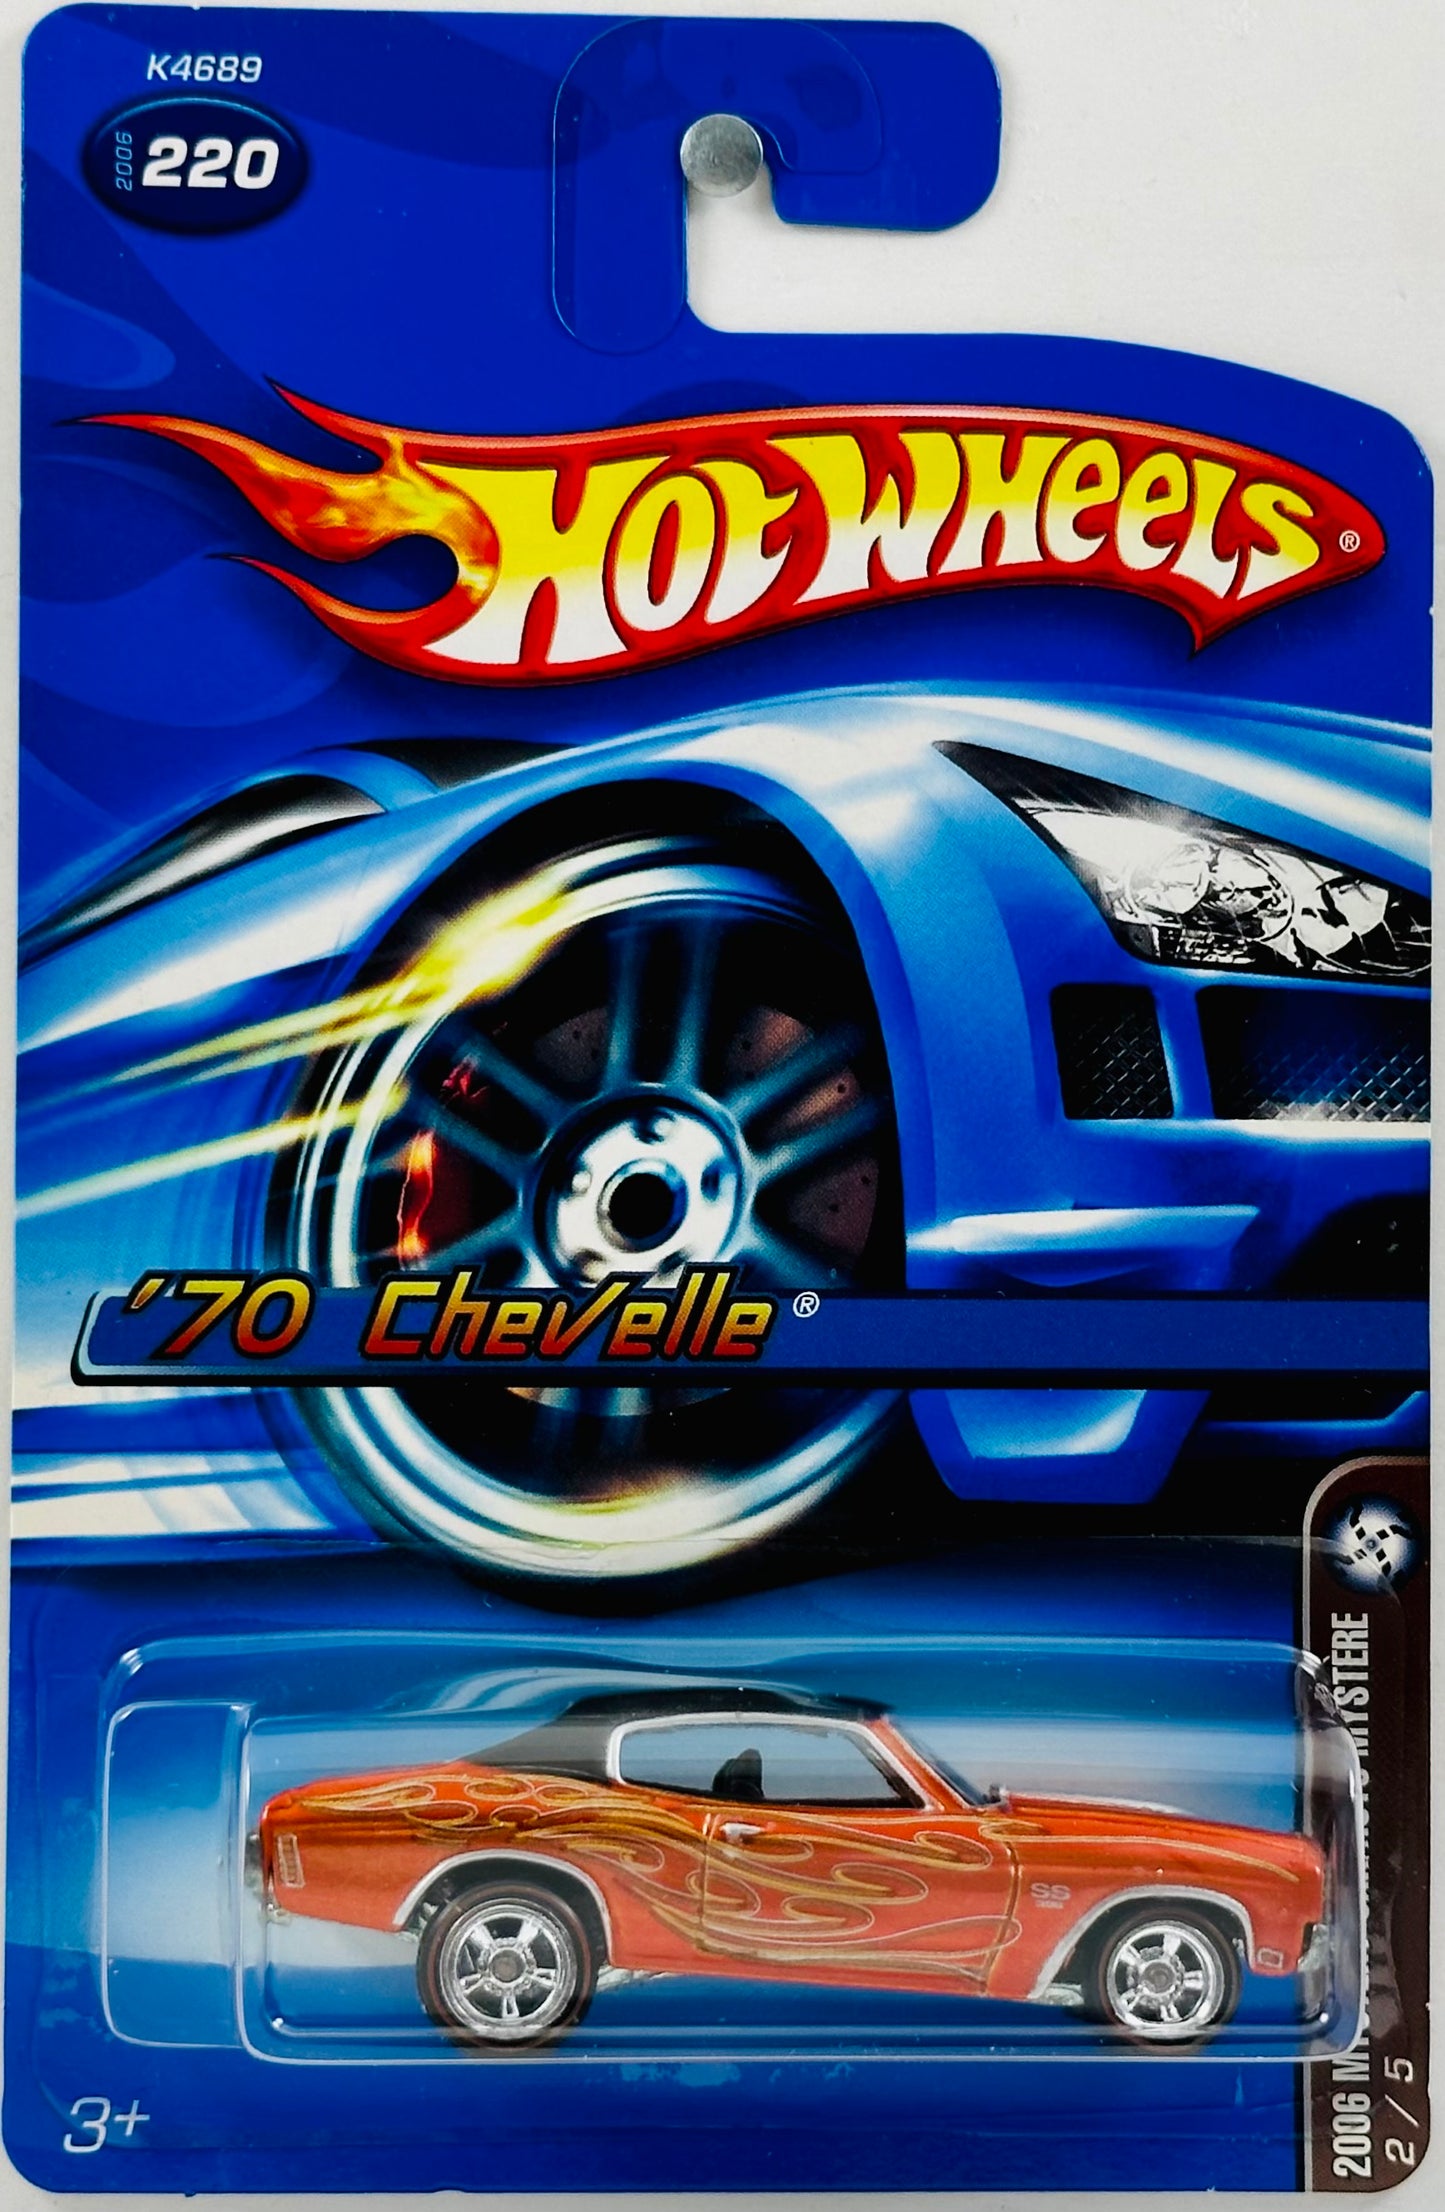 Hot Wheels 2006 - Collector # 220/223 - Mystery Car/Auto Mystere 02/05 - '70 Chevelle - Orange / Sliver Racing Stripes / Flames - Metal/Metal & Real Riders - Kar Keeper